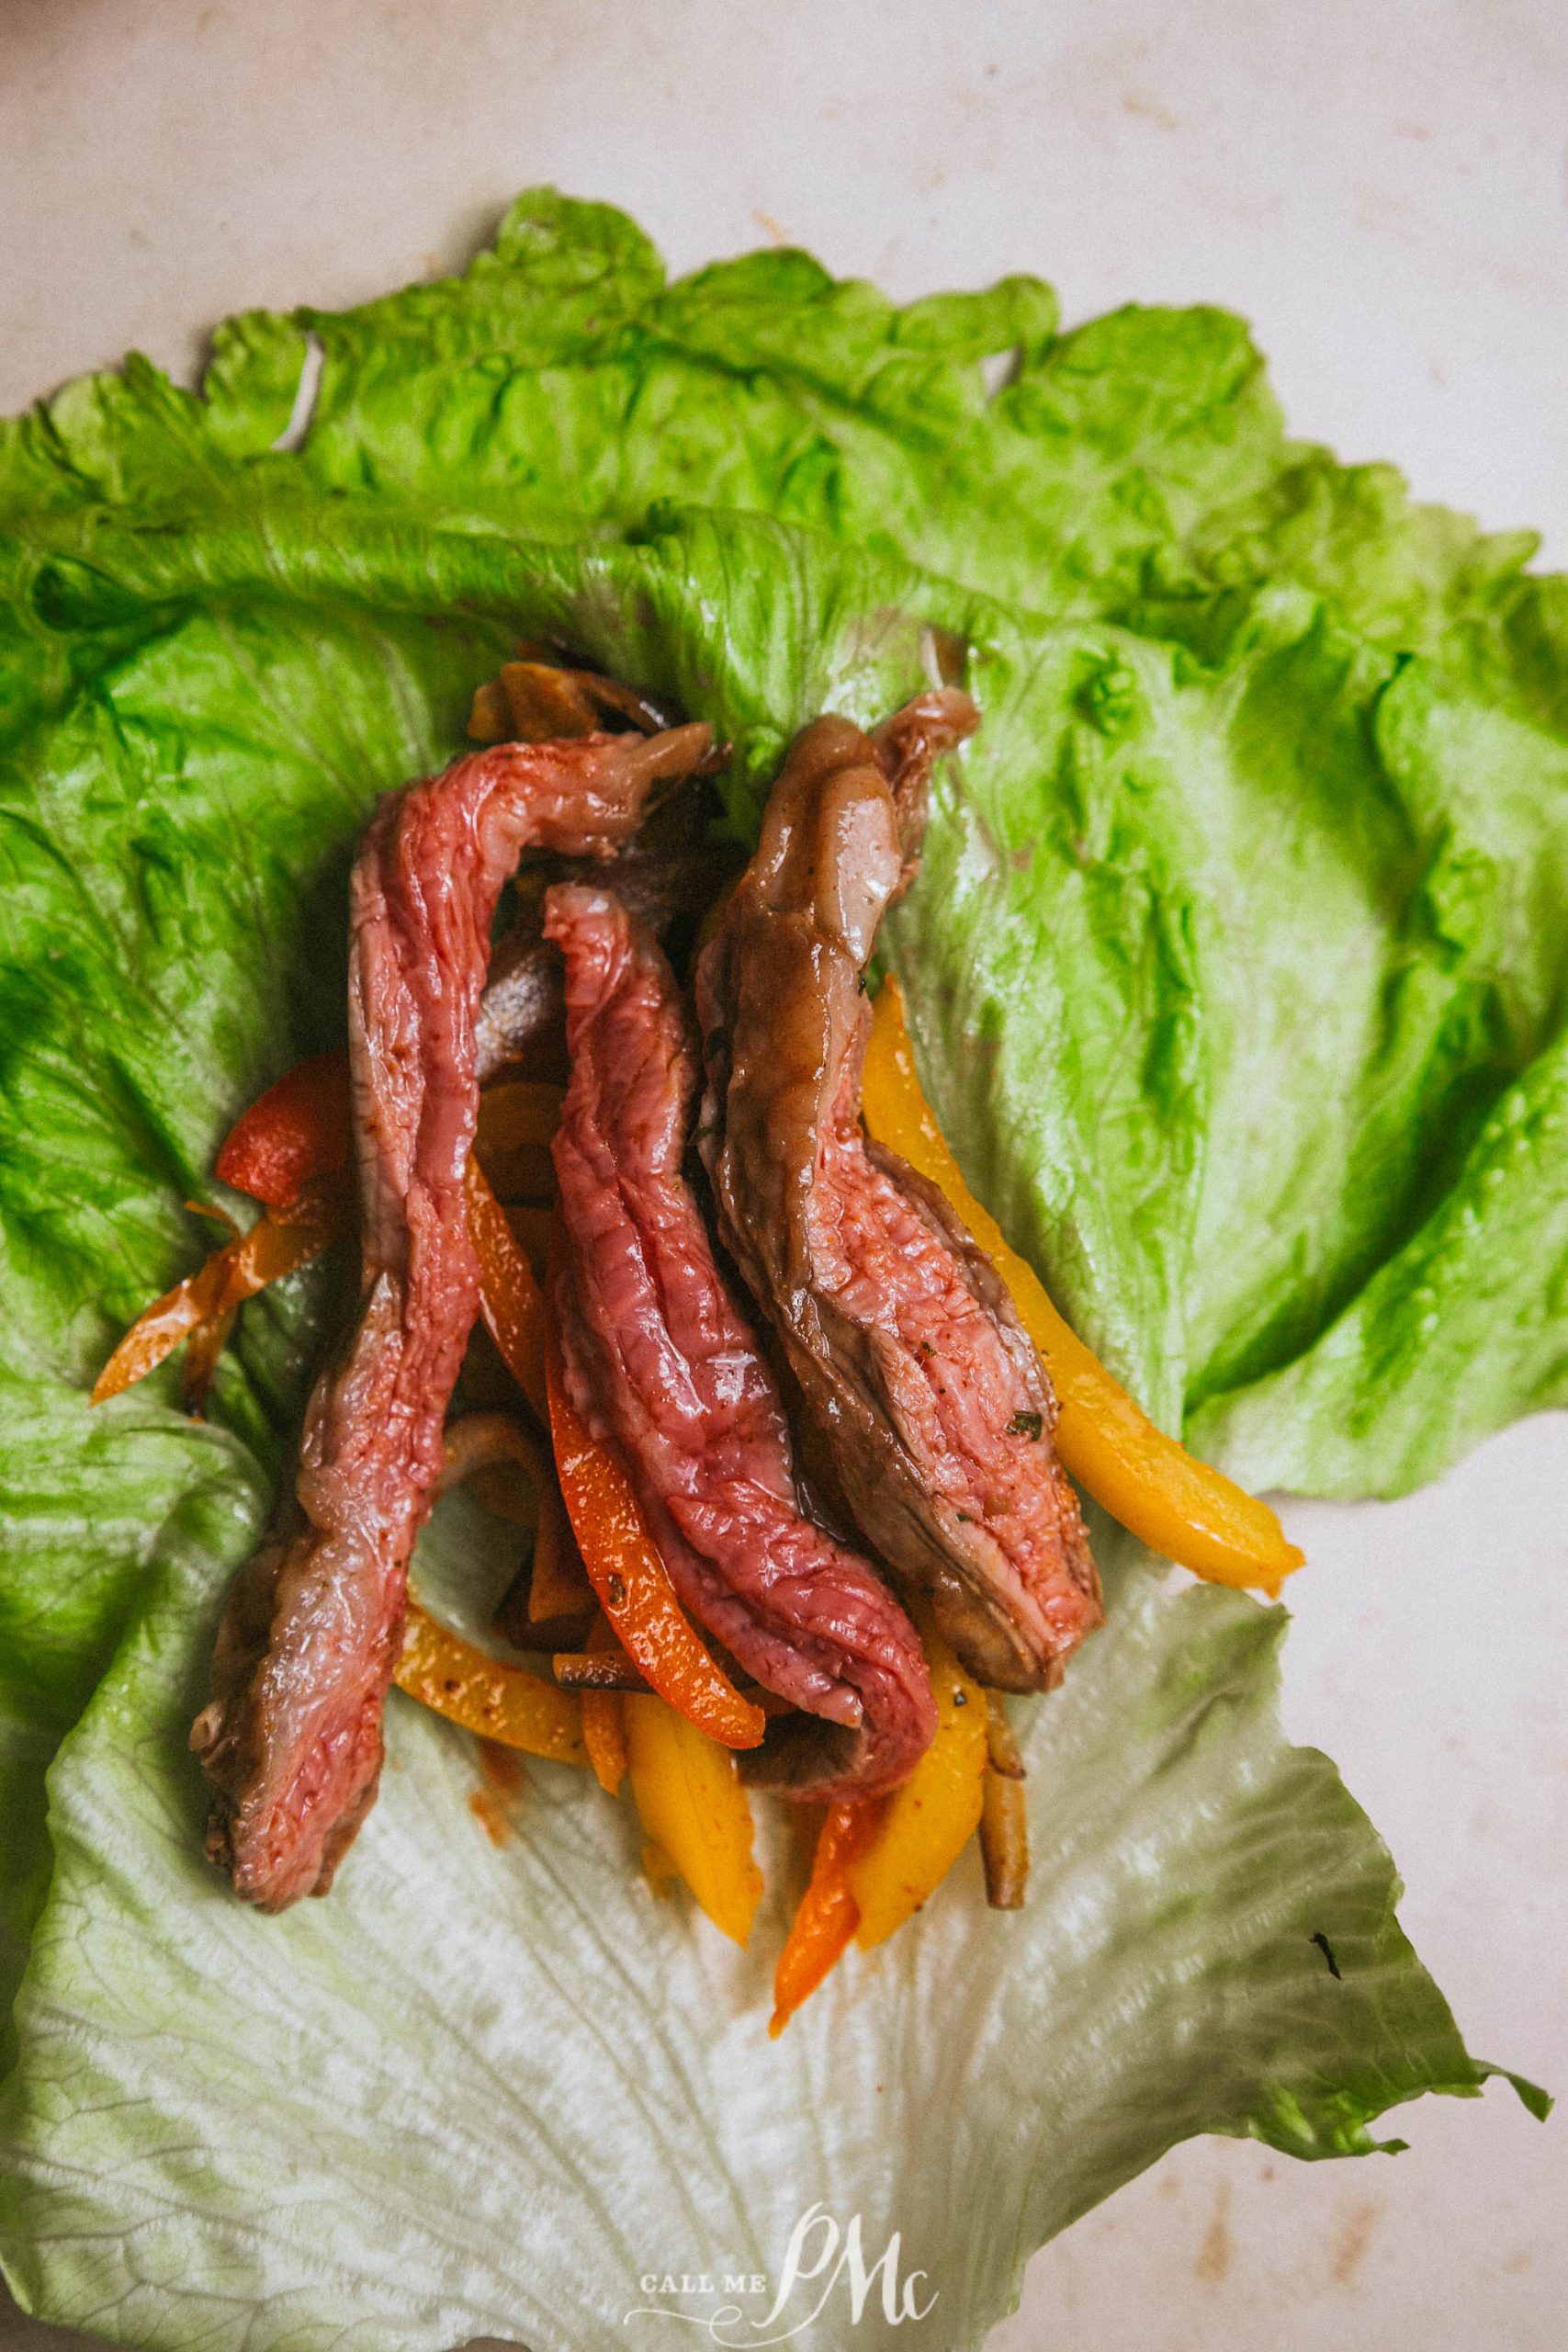 A lettuce wrap with steak and peppers on it.